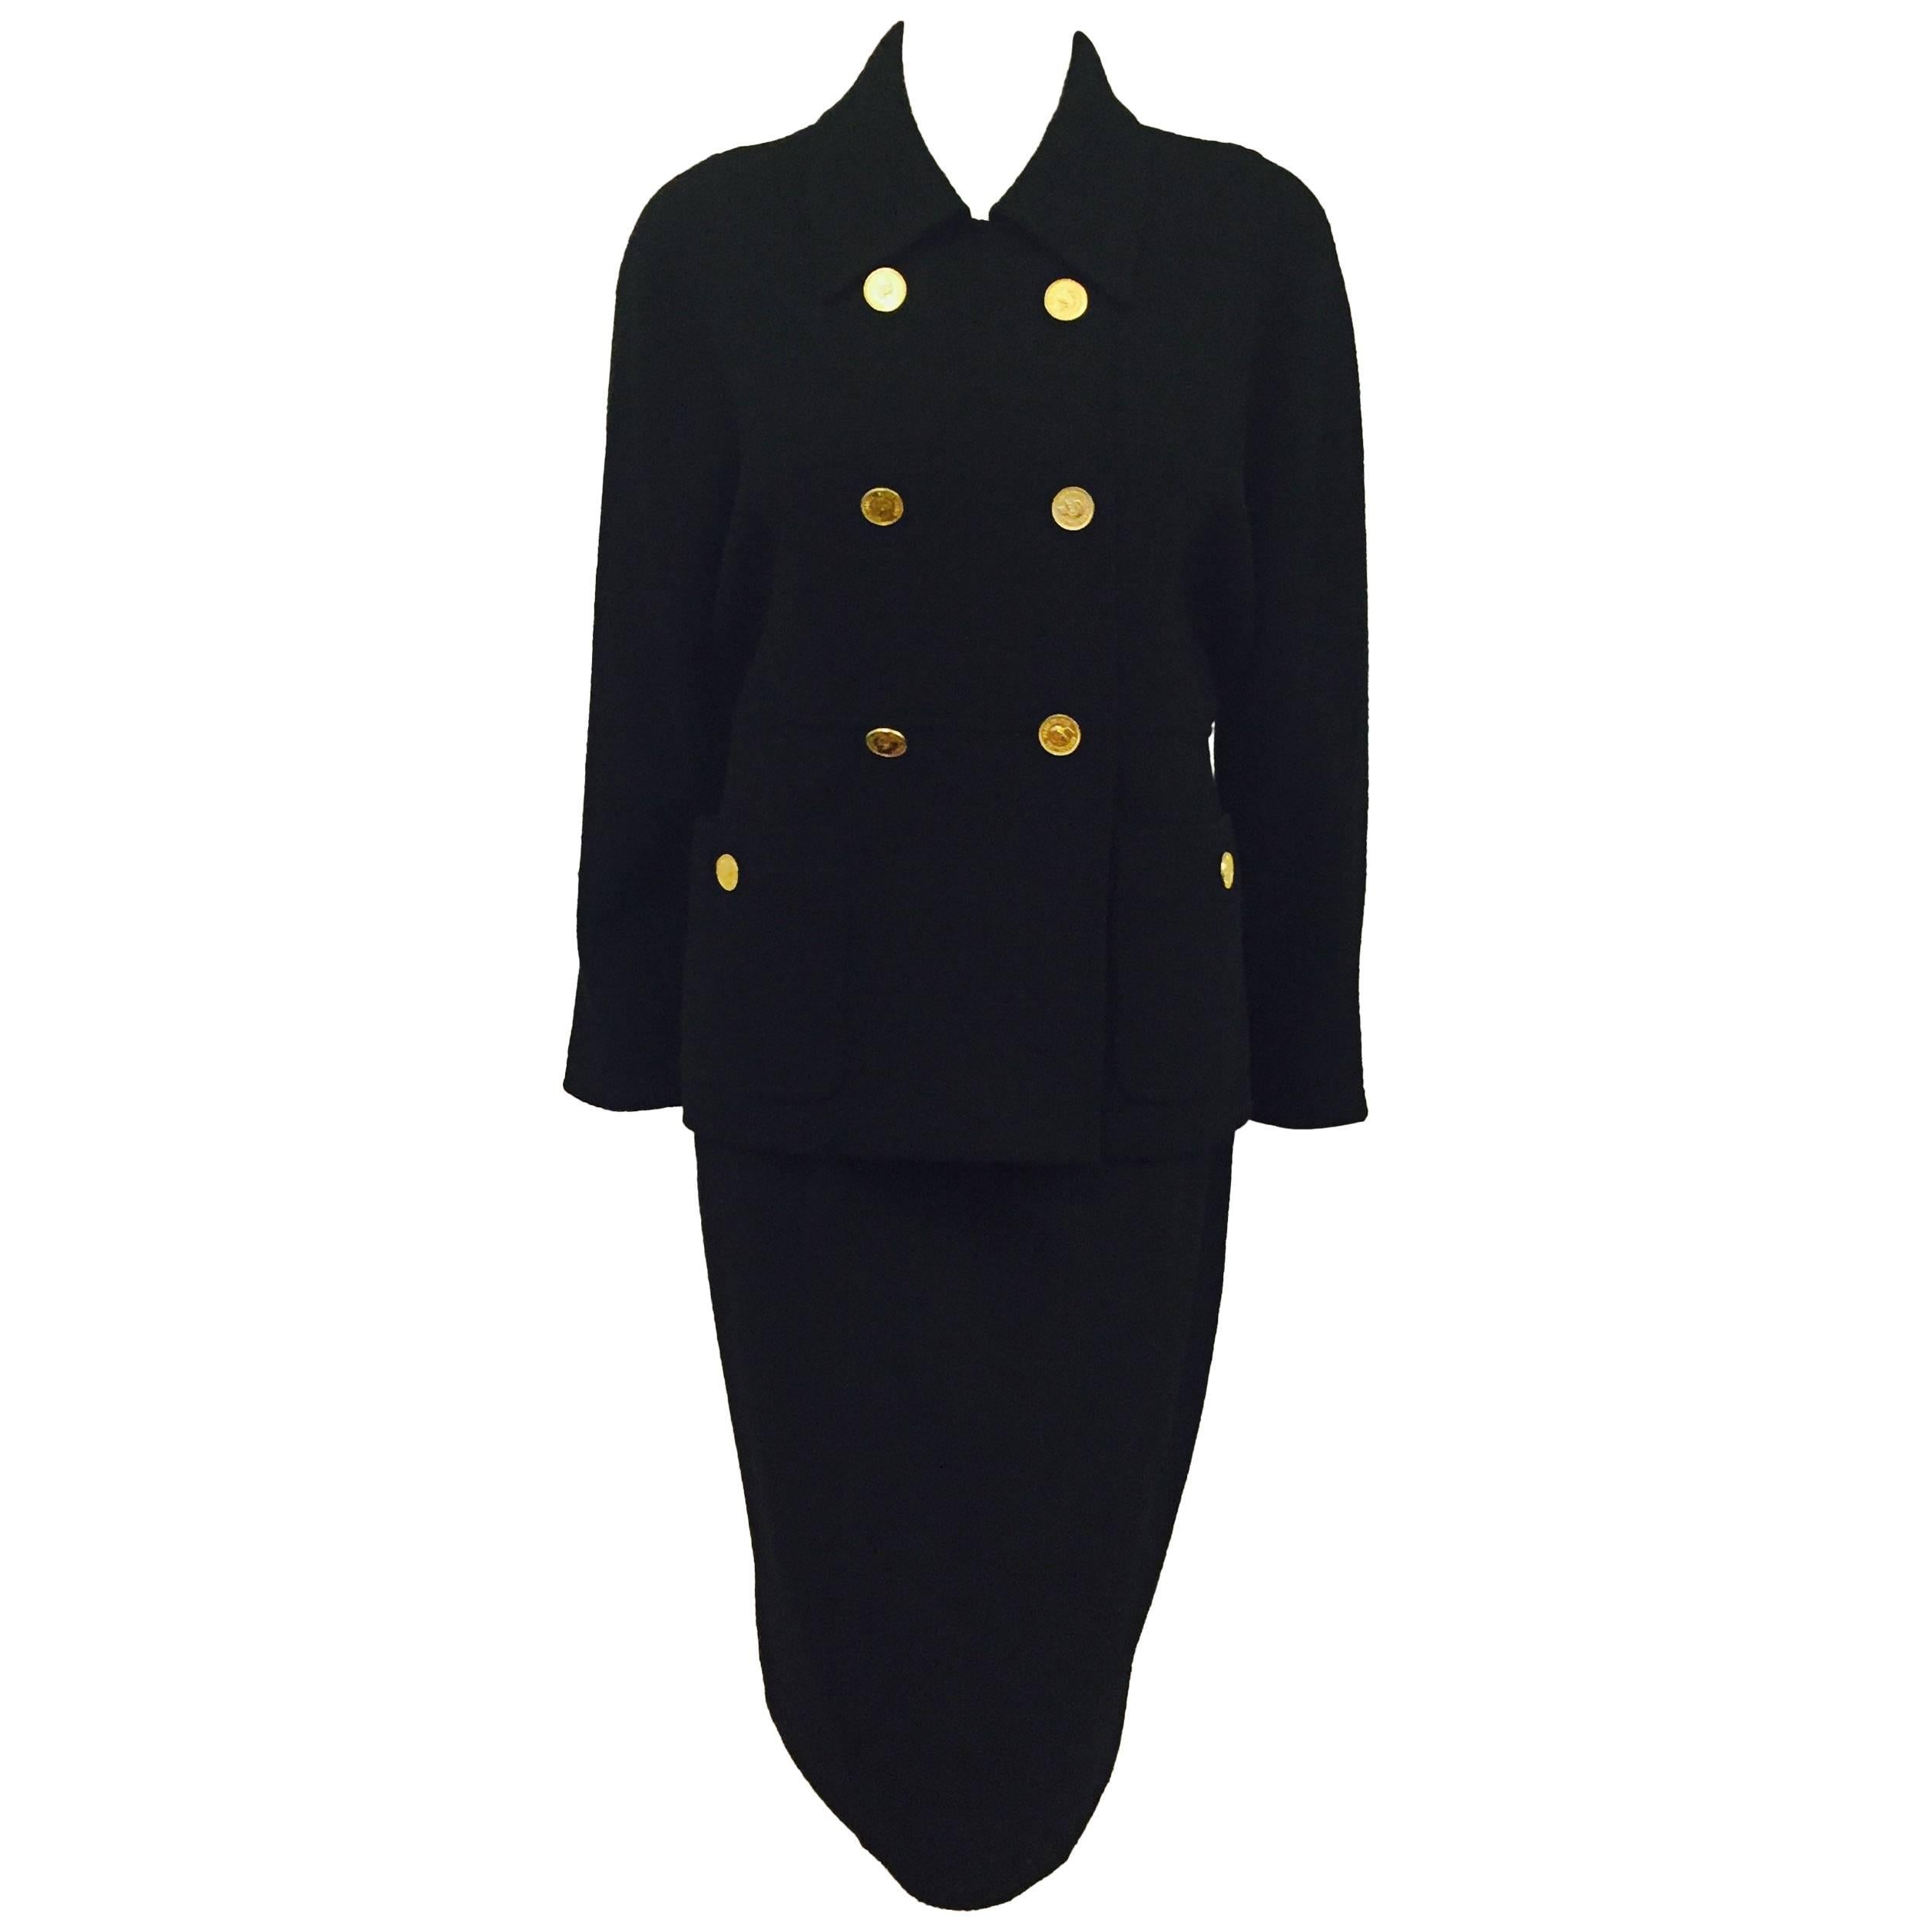 Classic Chanel Boutique Black Skirt Suit with Iconic Goldtone Profile Buttons For Sale